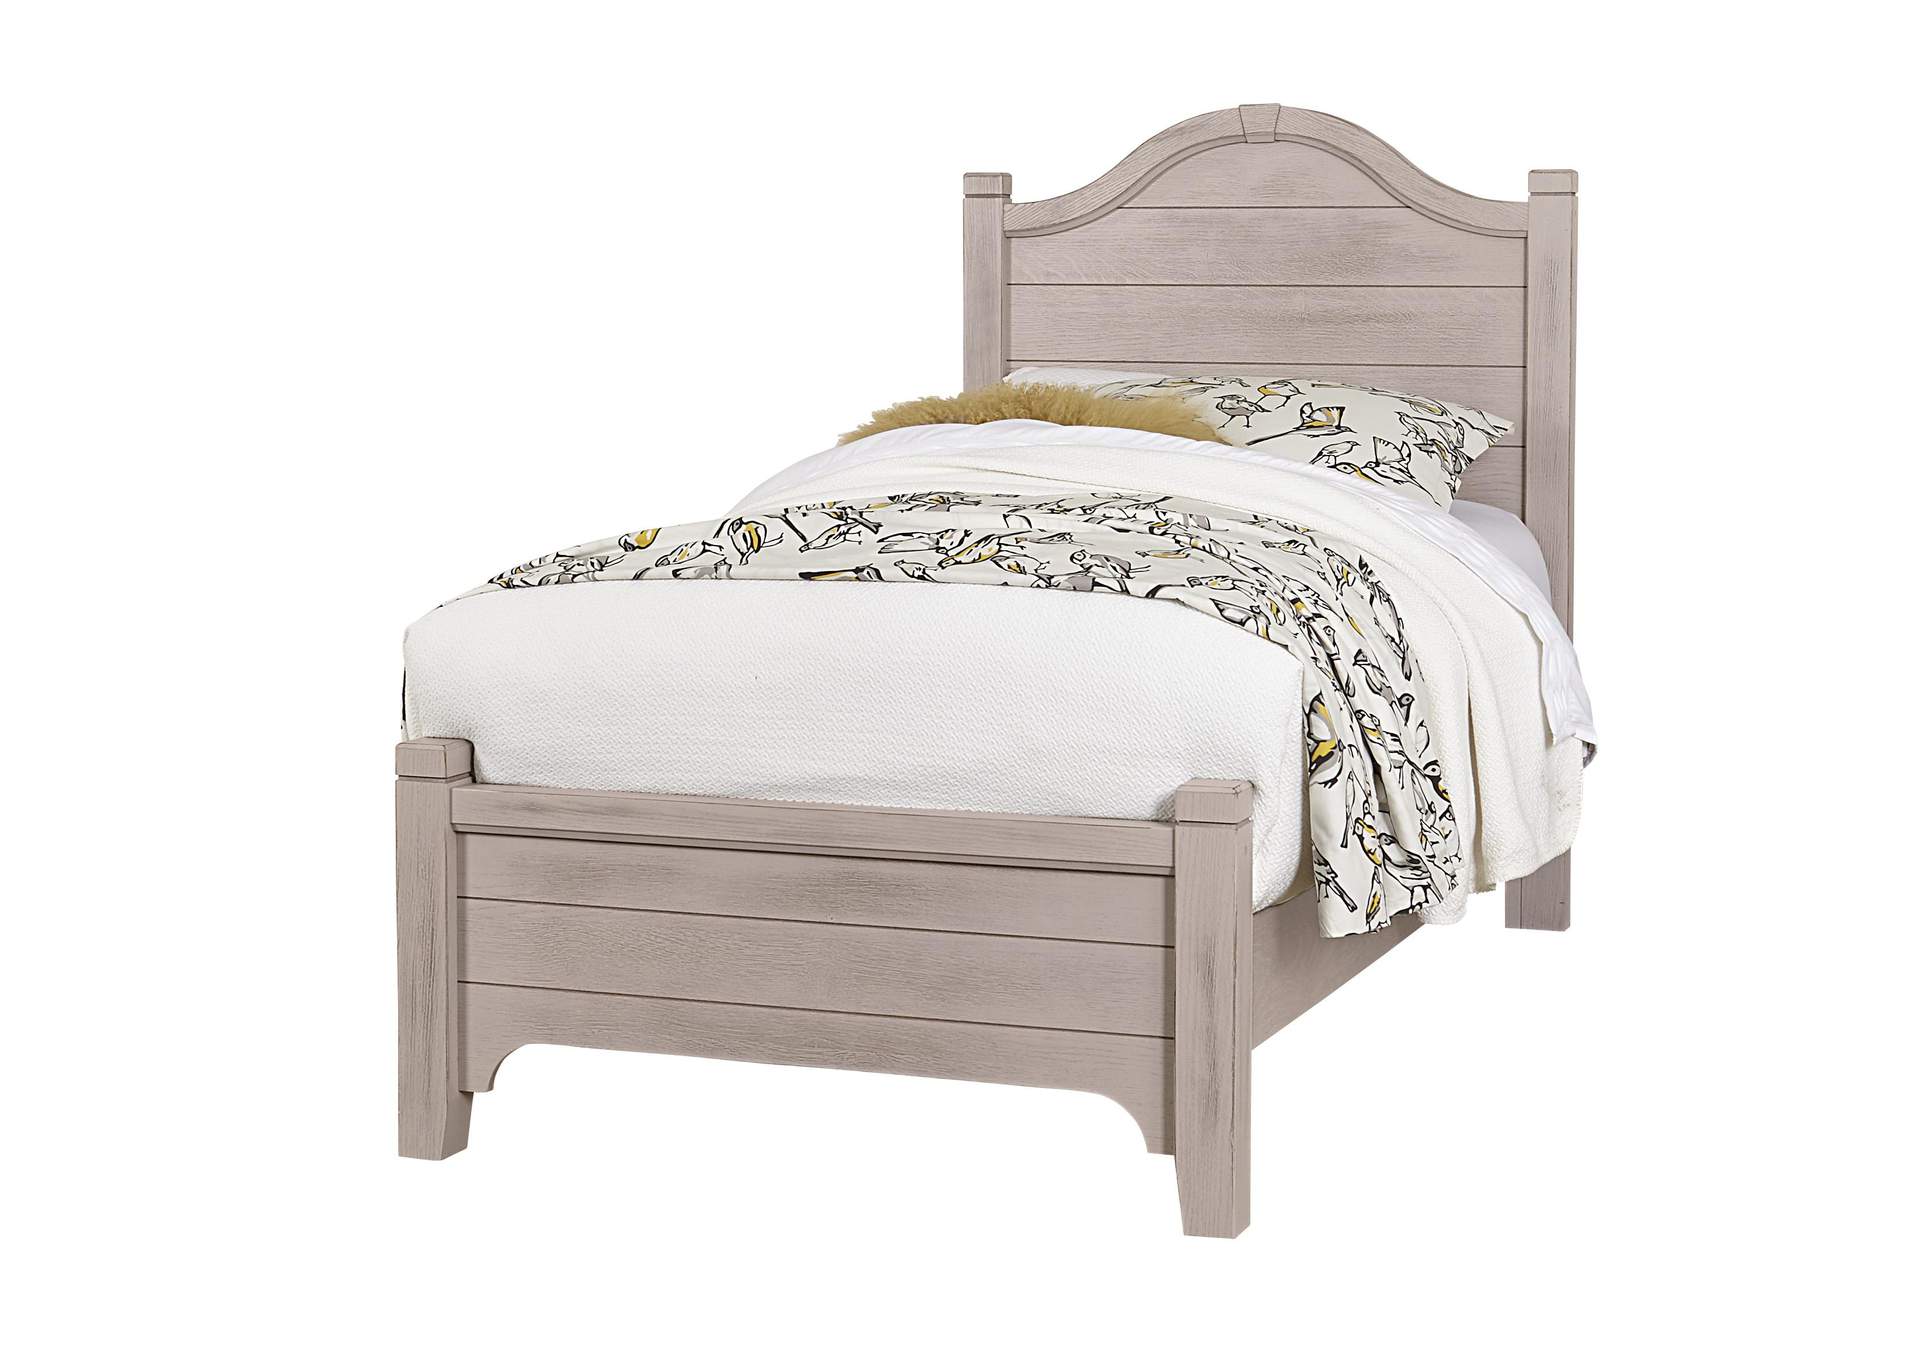 Bungalow Zorba Arch Twin Bed